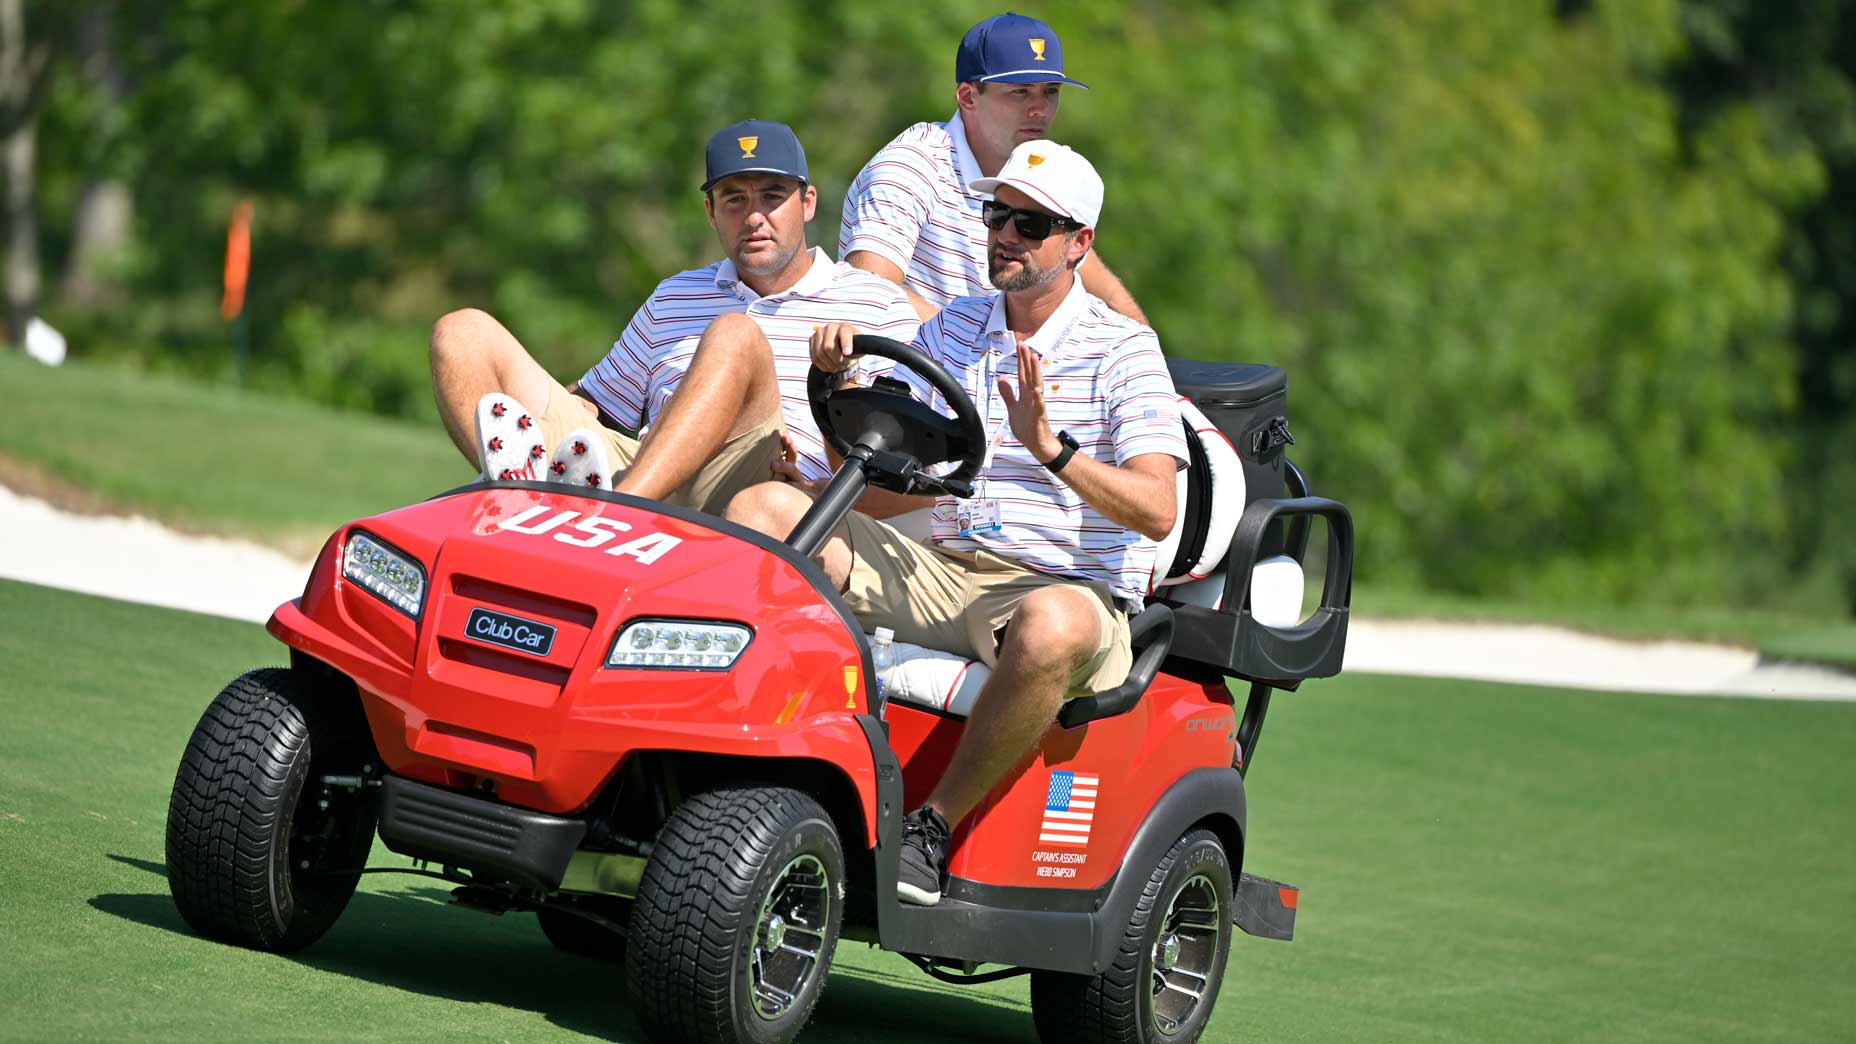 Webb Simpson drives Scottie Scheffler and Sam Burns down the 12th hole prior to Presidents Cup at Quail Hollow September 19, 2022, in Charlotte, North Carolina.